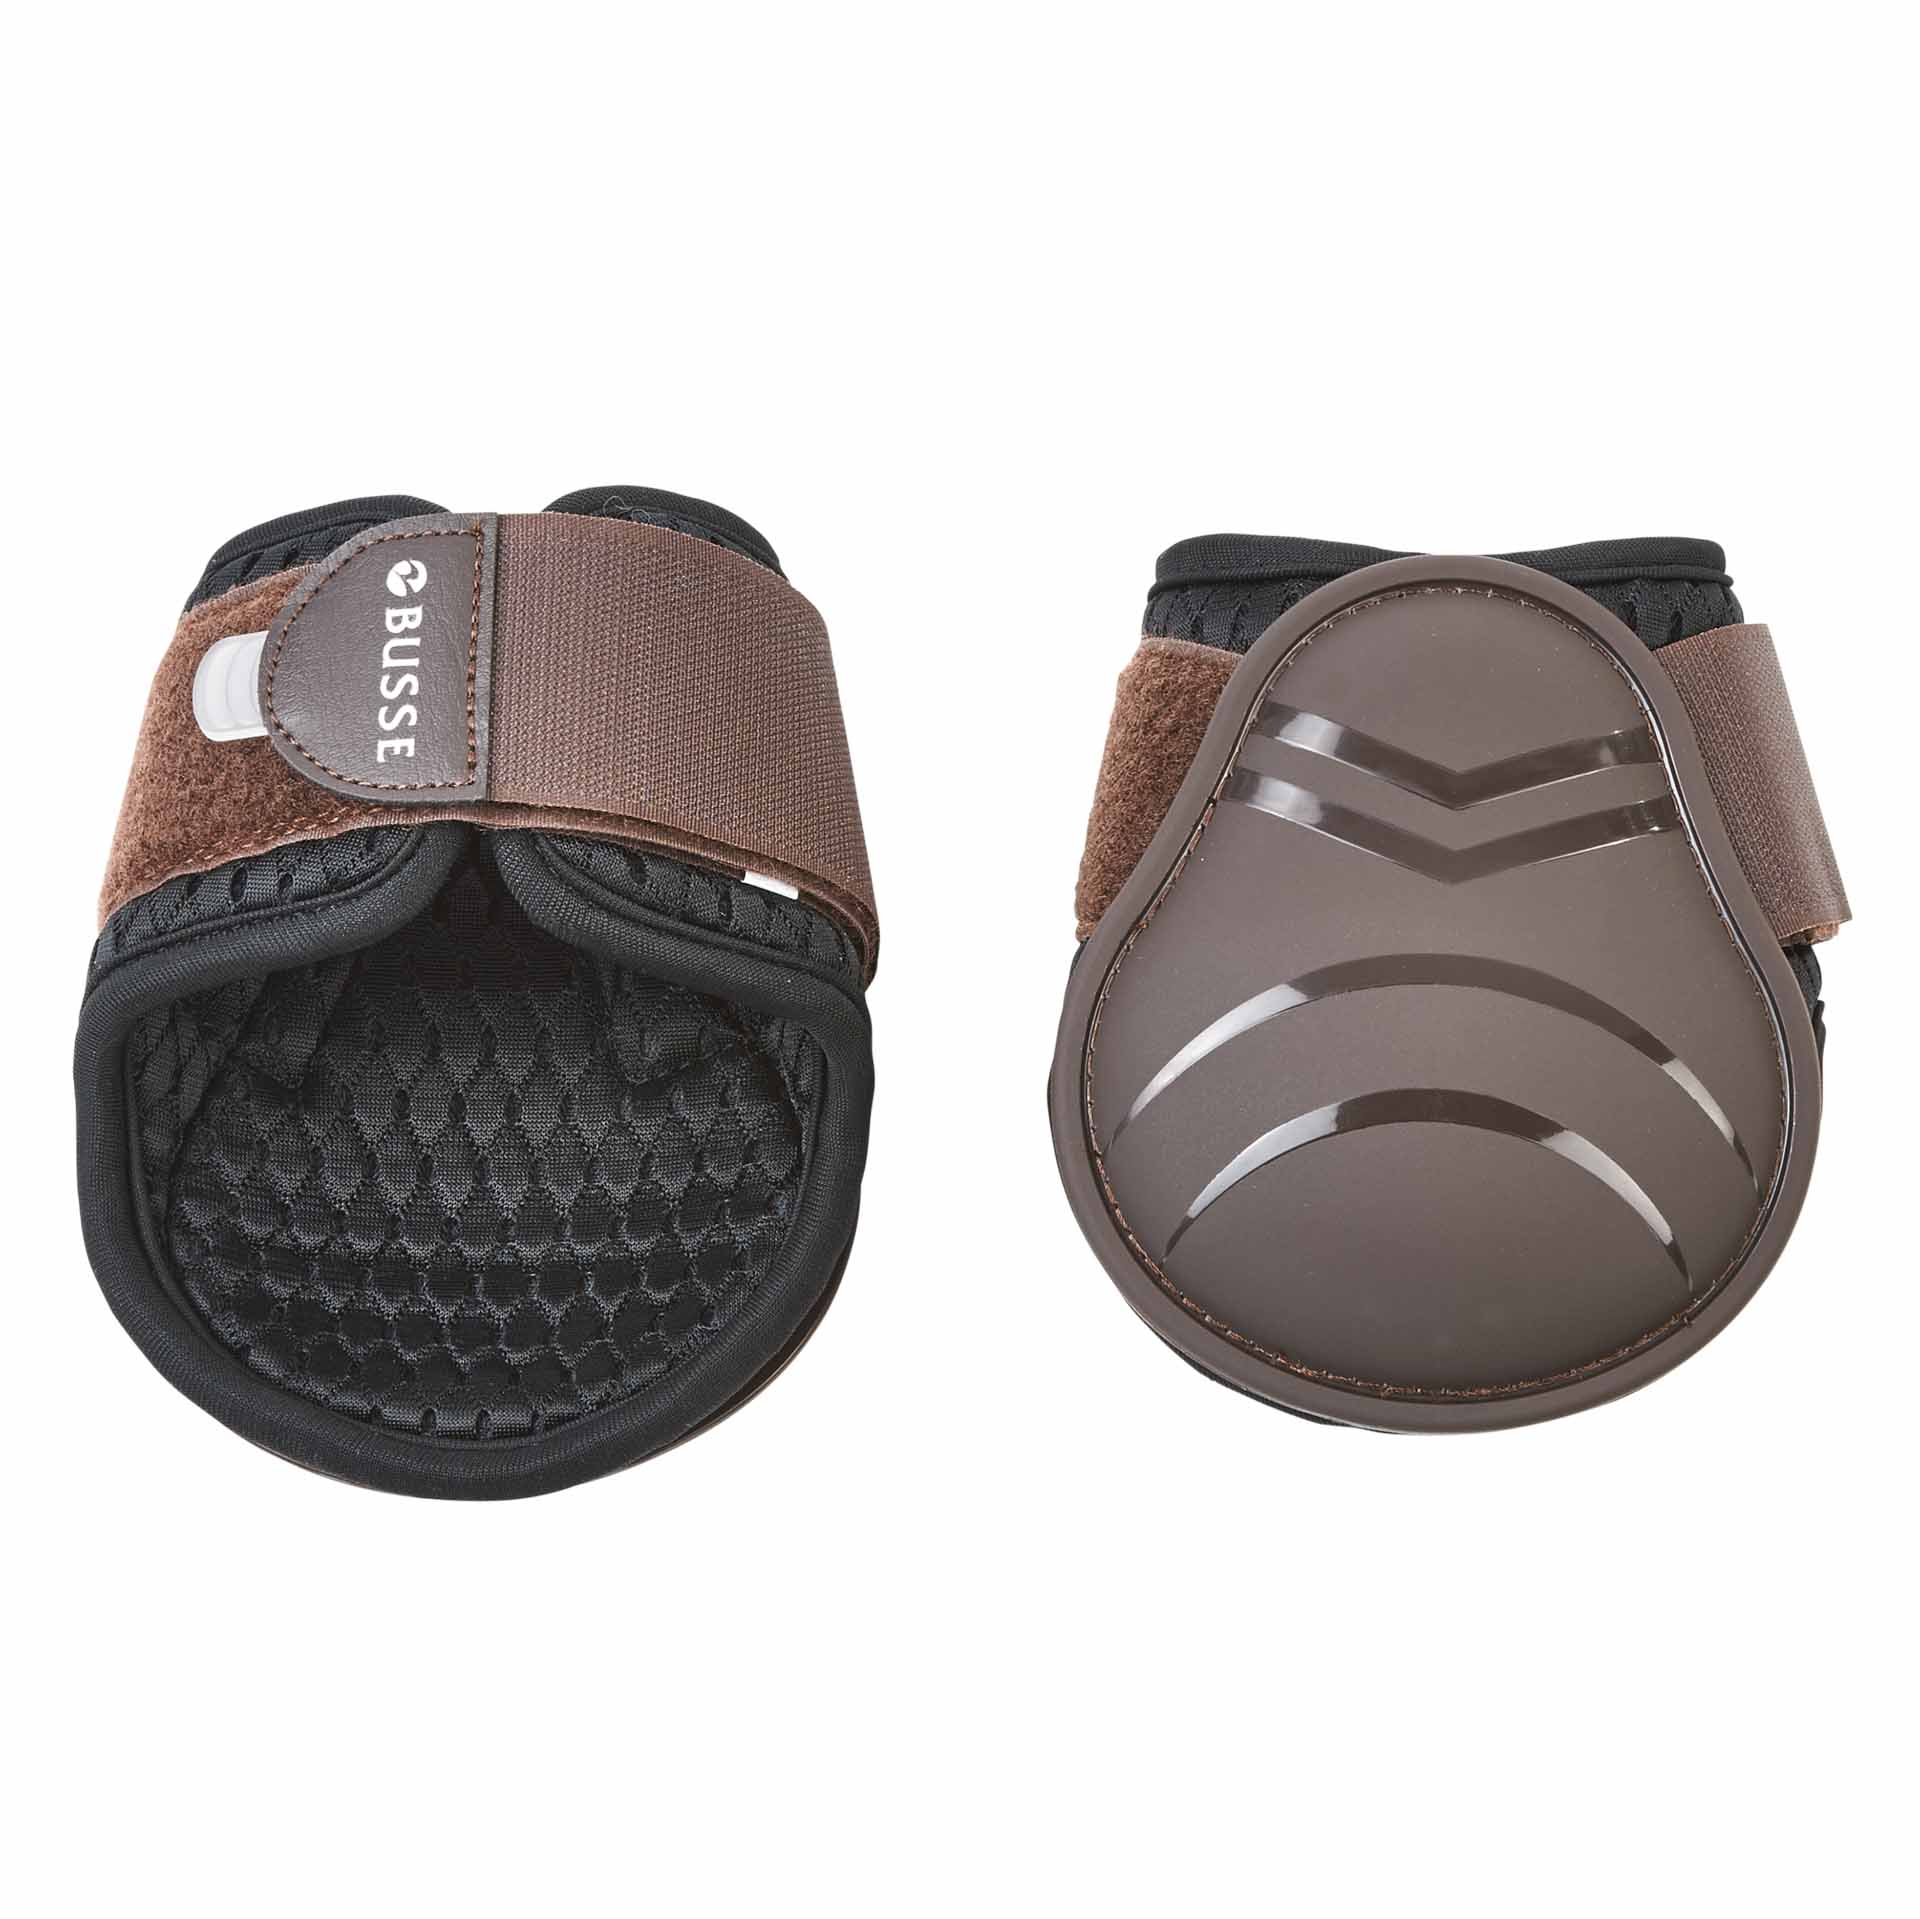 BUSSE Fetlock Boots BOUNCE MESH Pony brown black